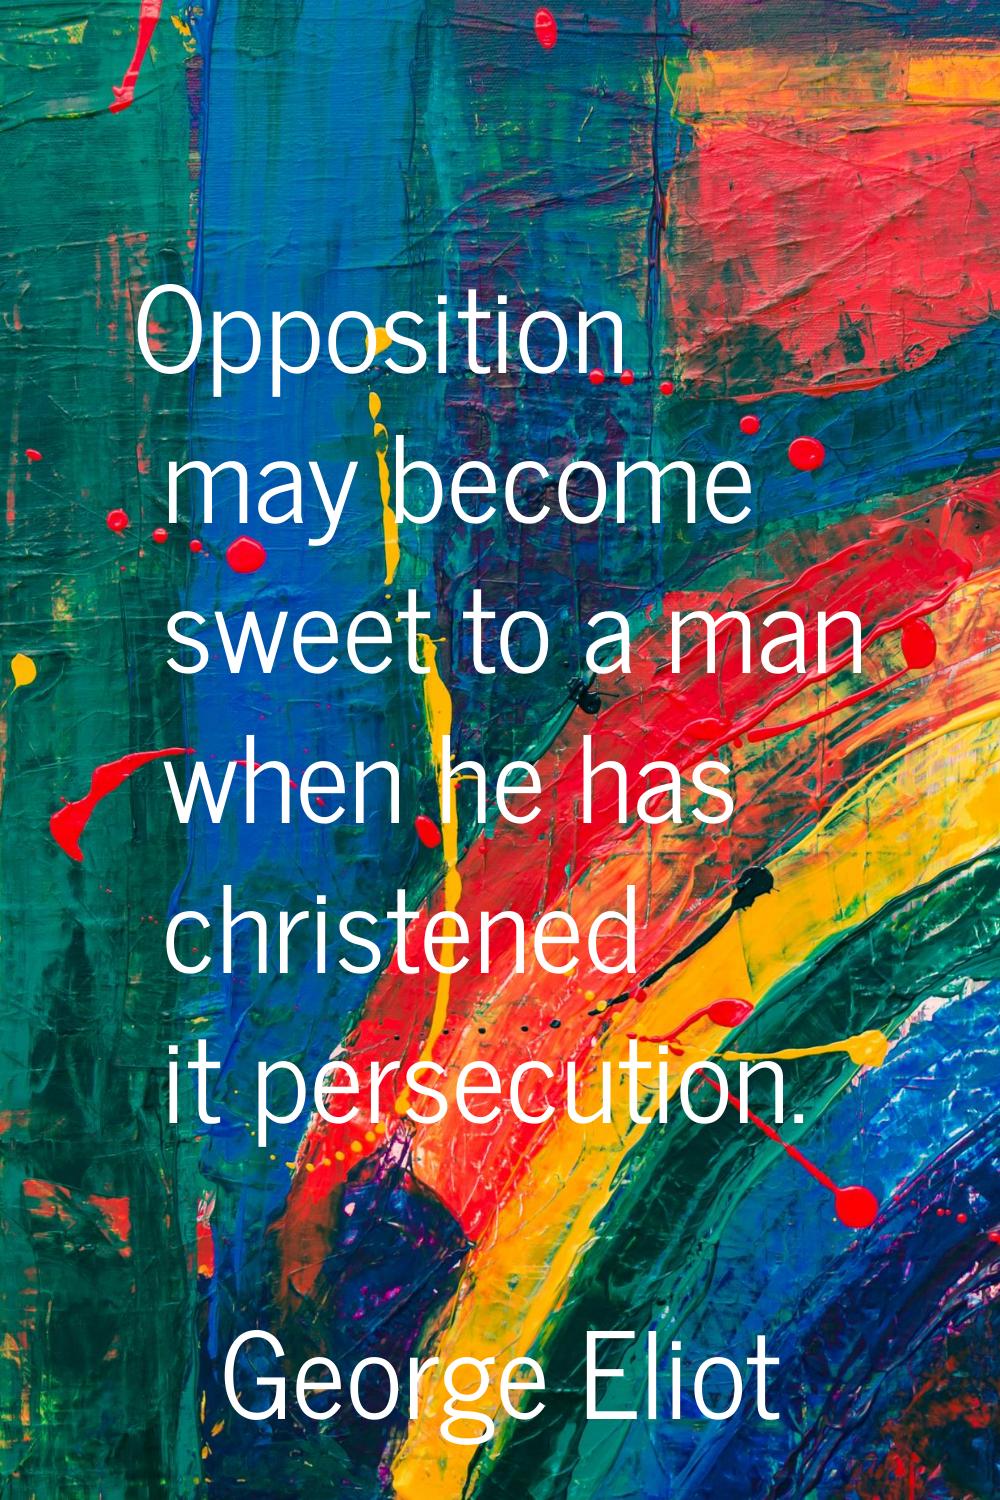 Opposition may become sweet to a man when he has christened it persecution.